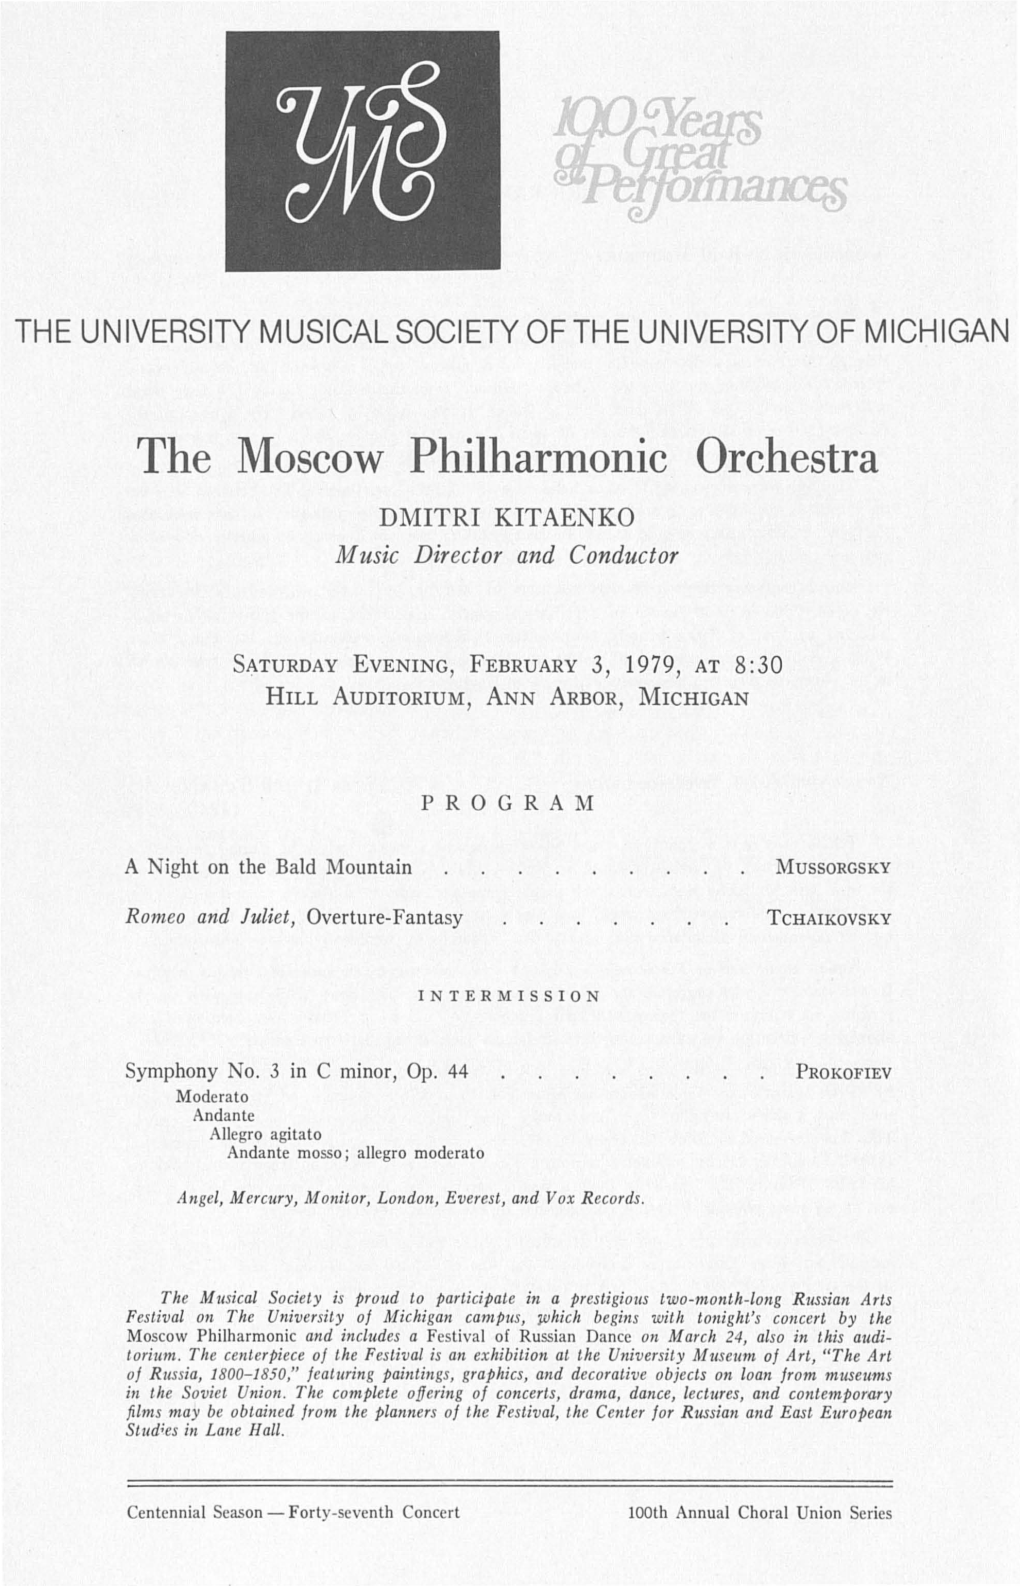 The Moscow Philharmonic Orchestra DMITRI KITAENKO Music Director and Conductor